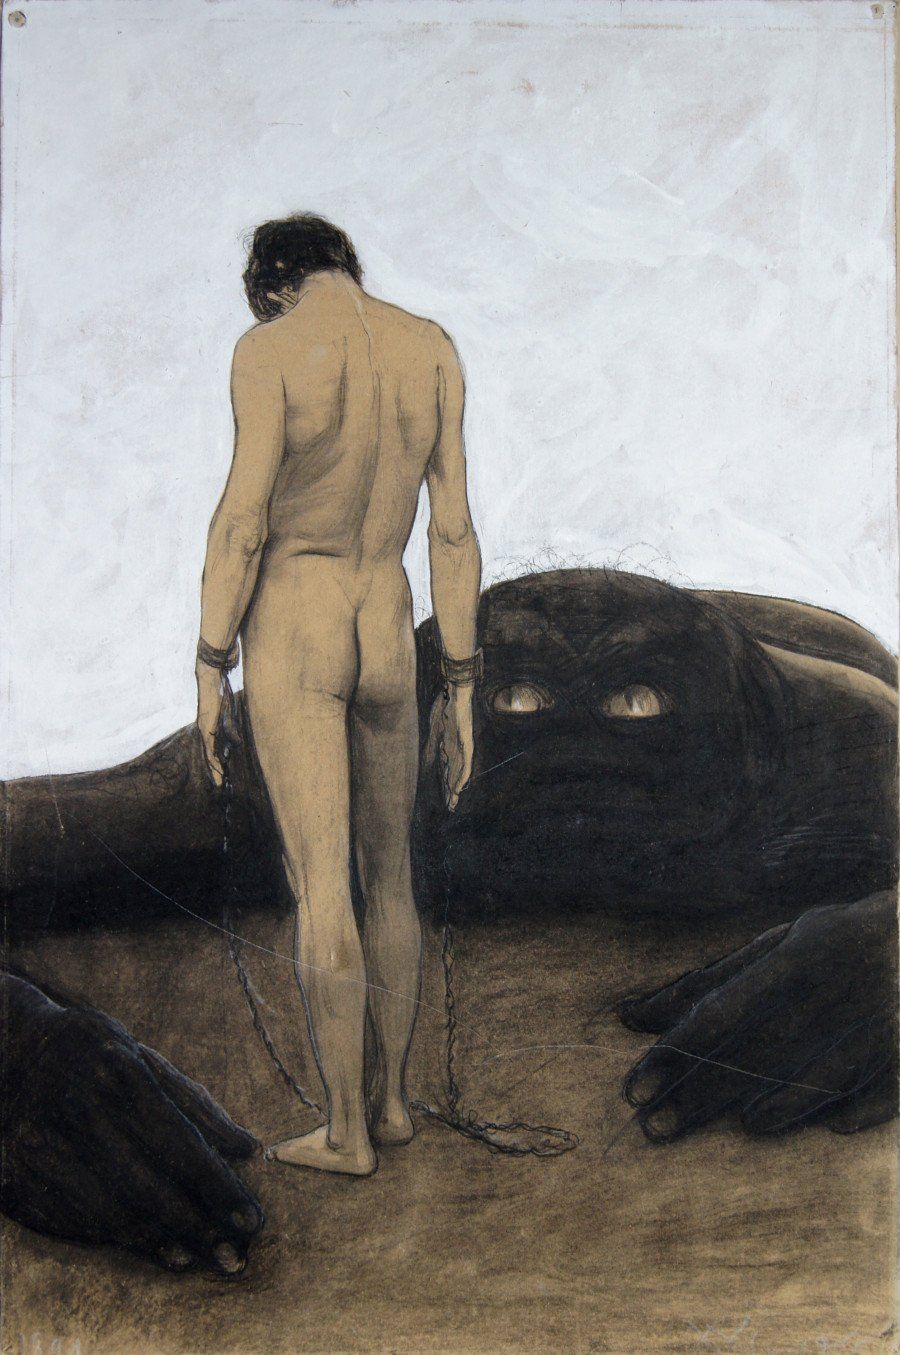 Nudist paintings of the early 1900s